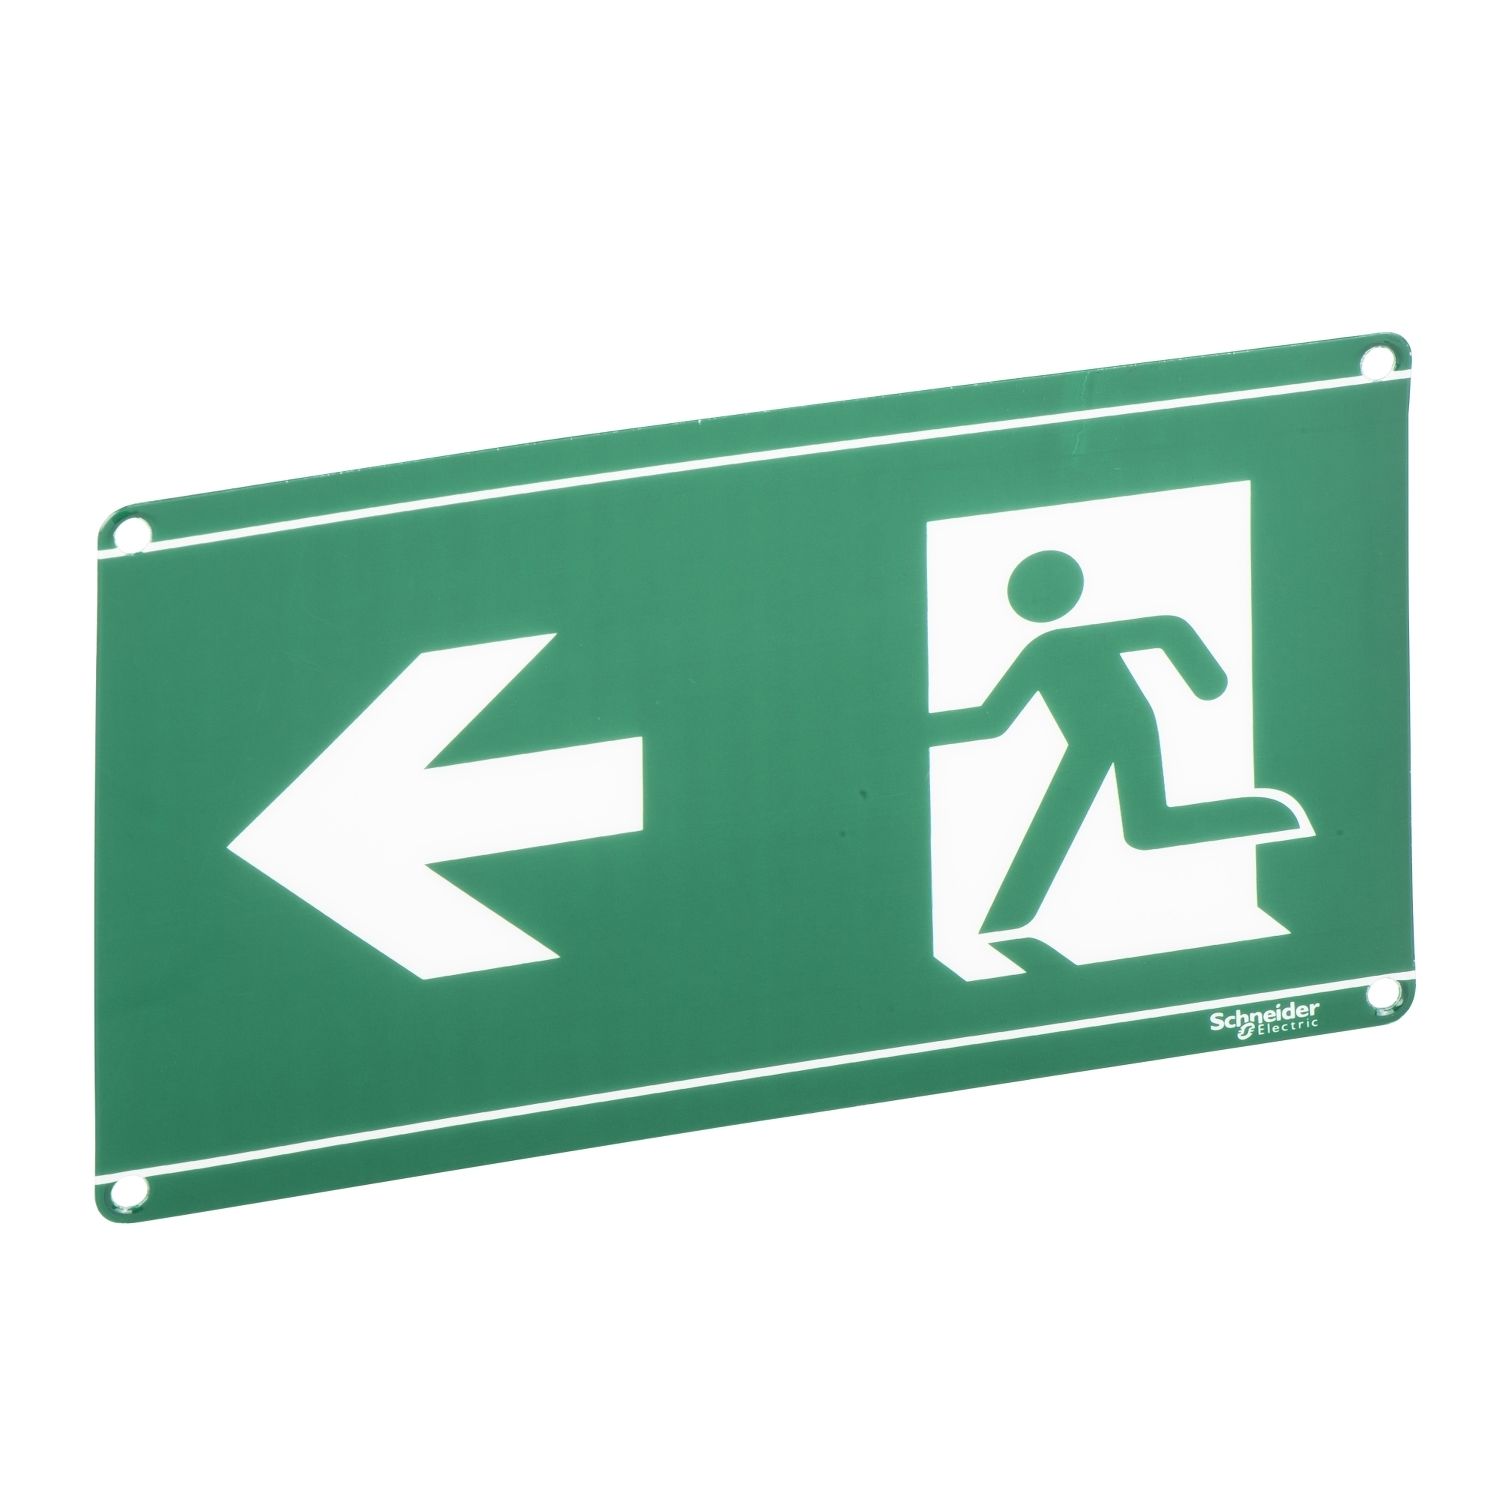 OVA53149 Quick Signal - exit sign screen double - running man towards the left/right